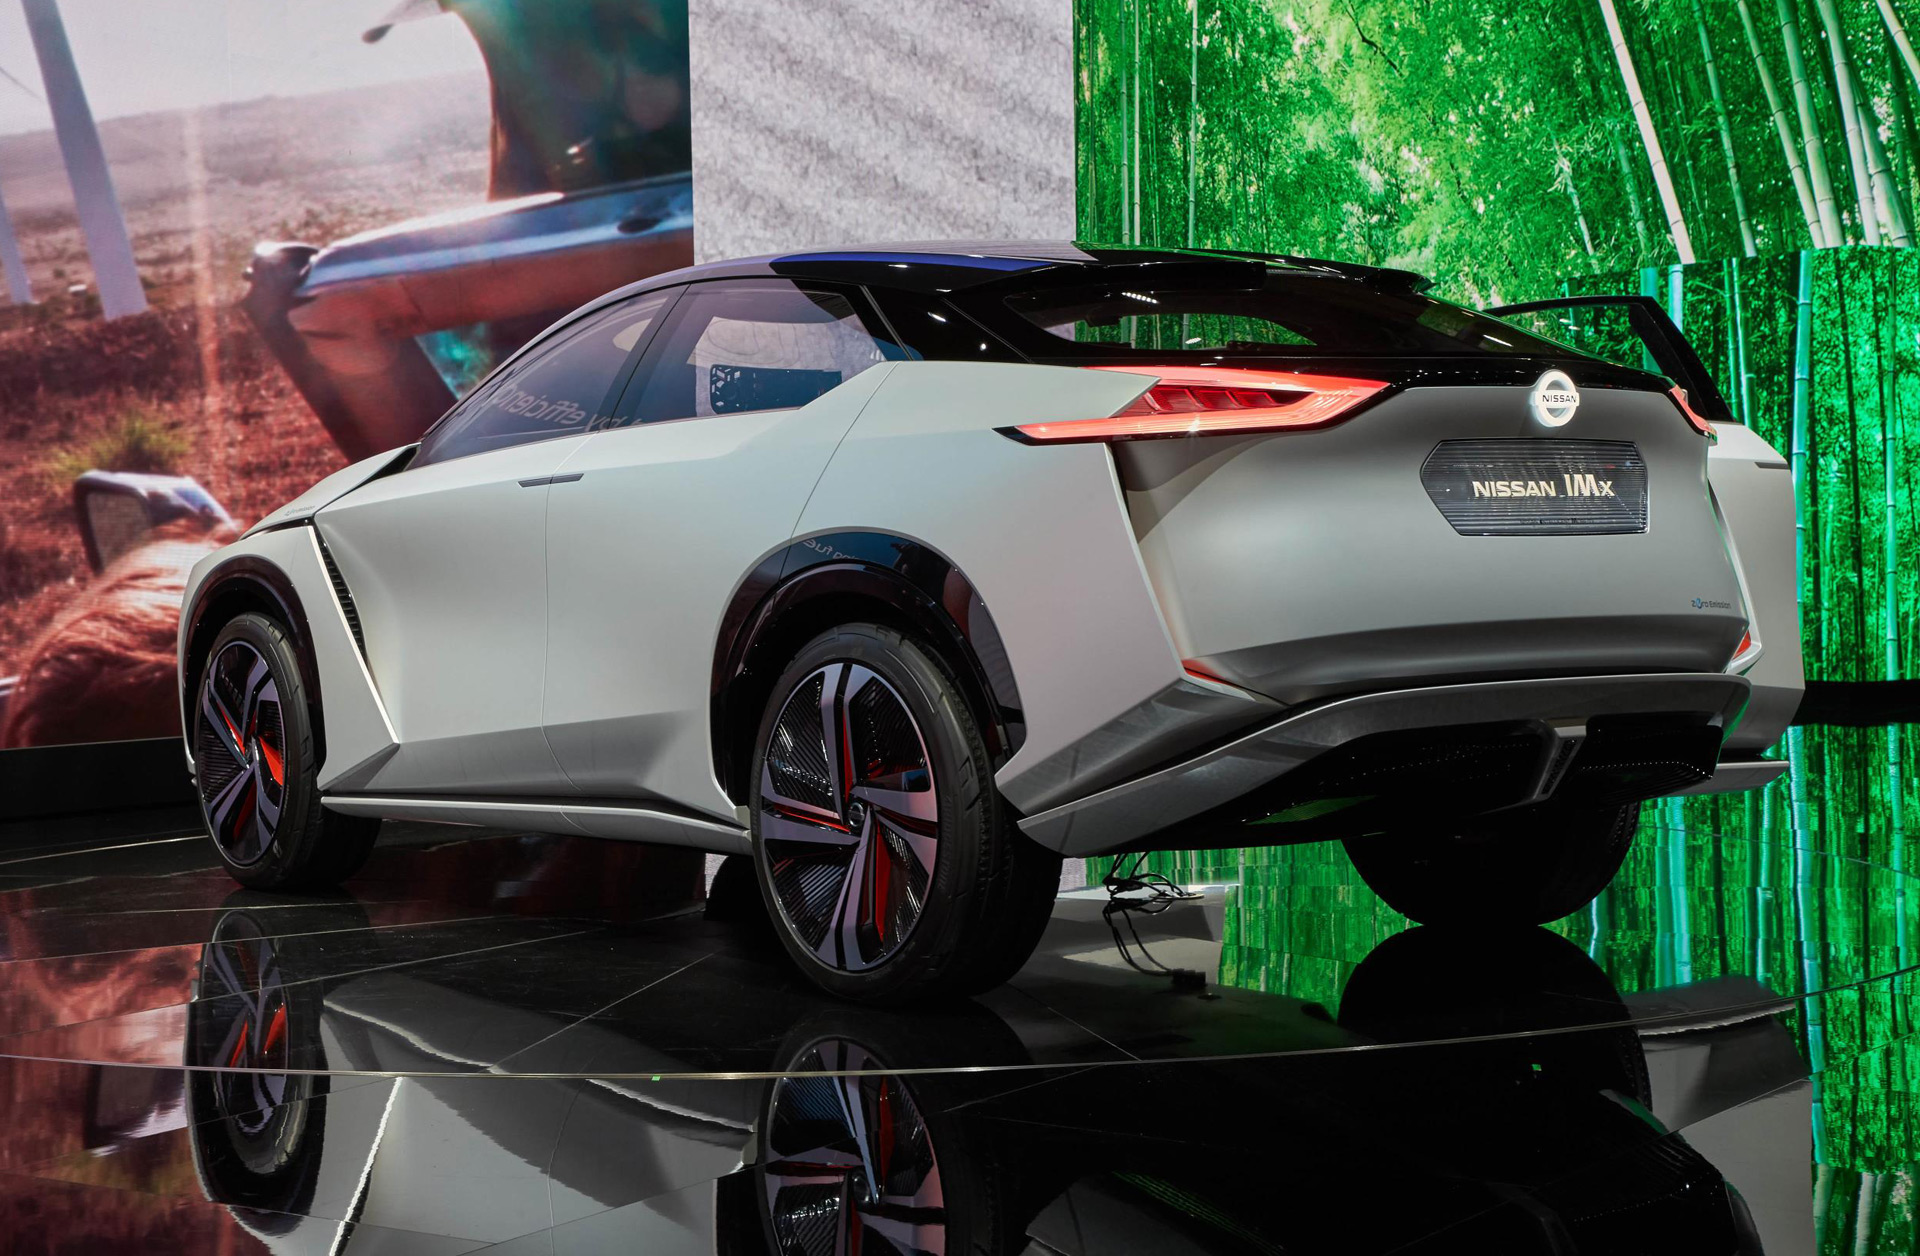 Nissan IMx is a self-driving electric SUV concept